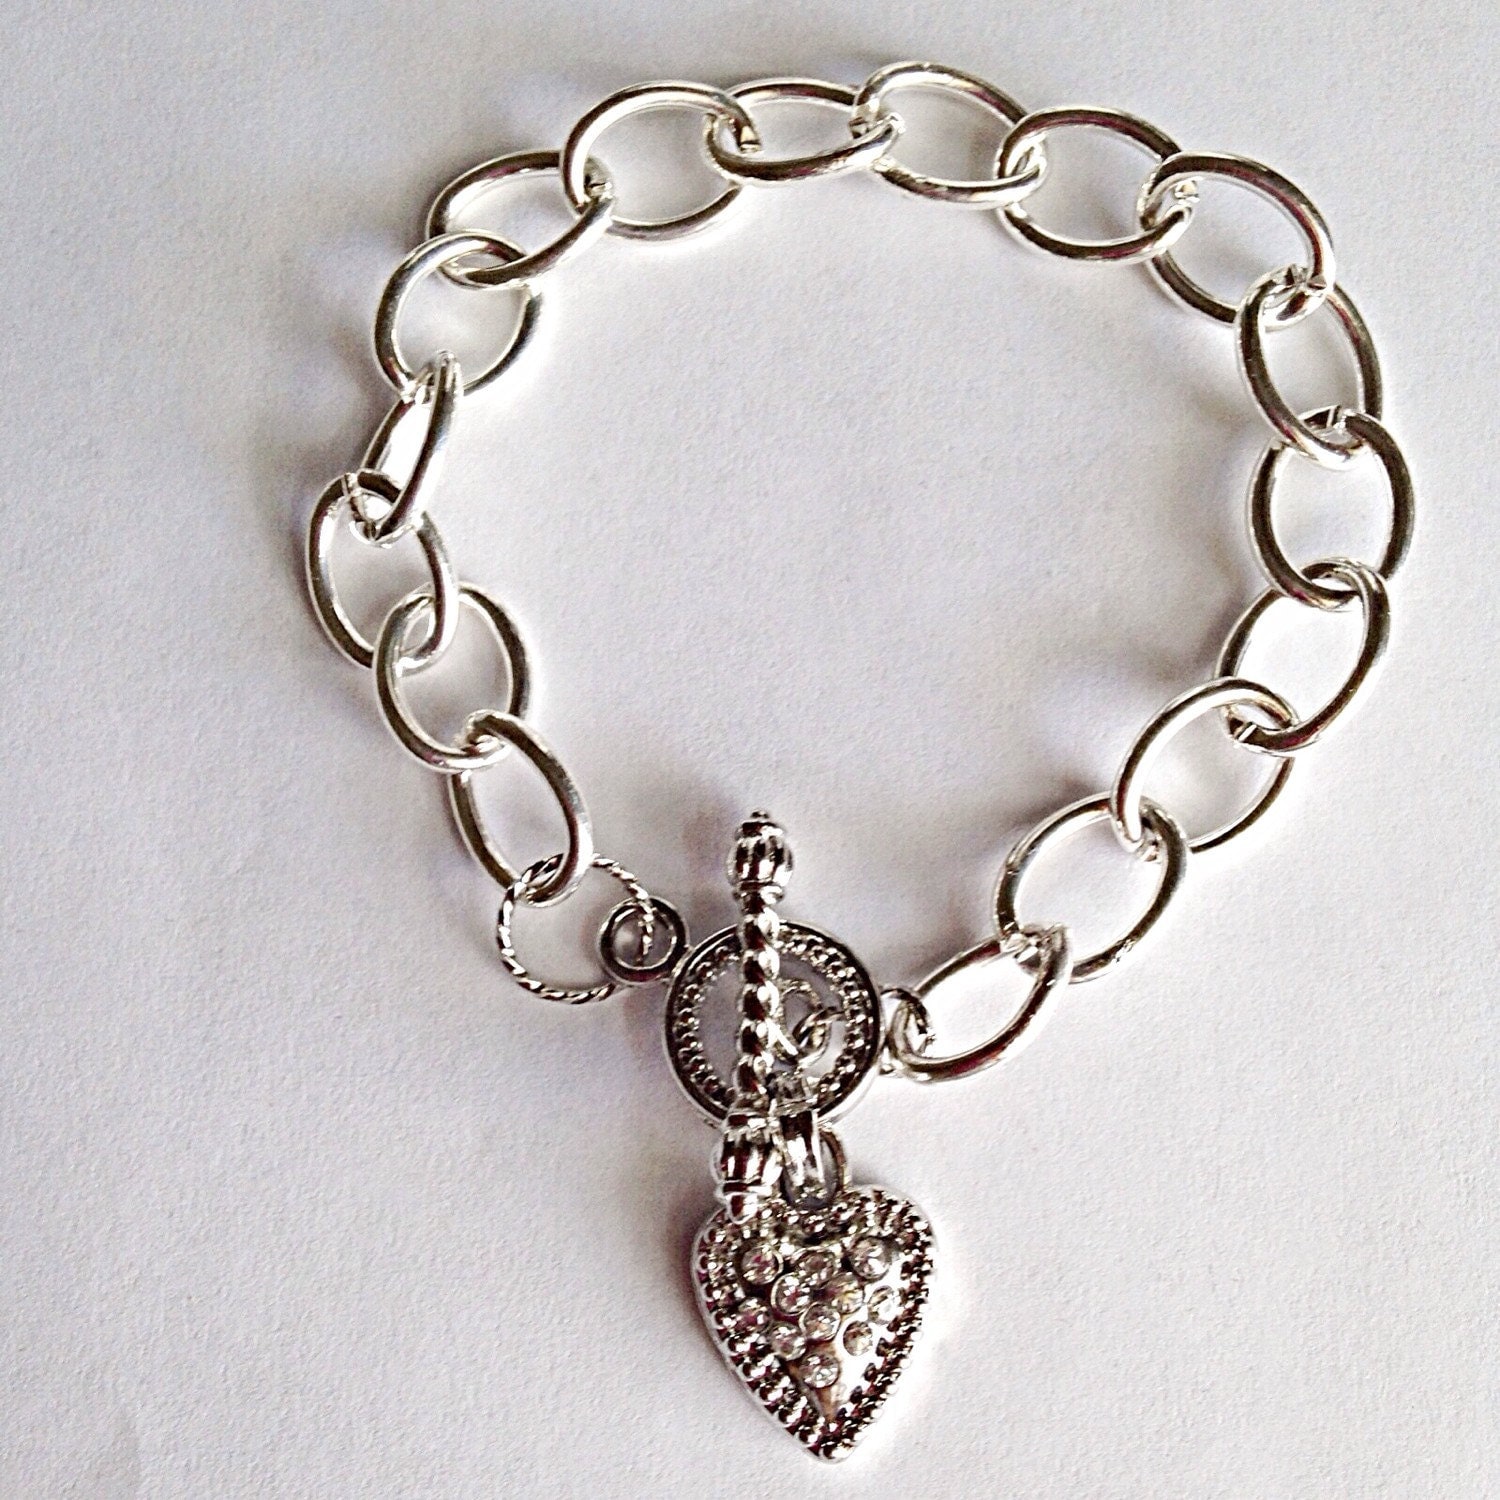 Large Silverplated Chain Link Bracelet With Toggle Heart